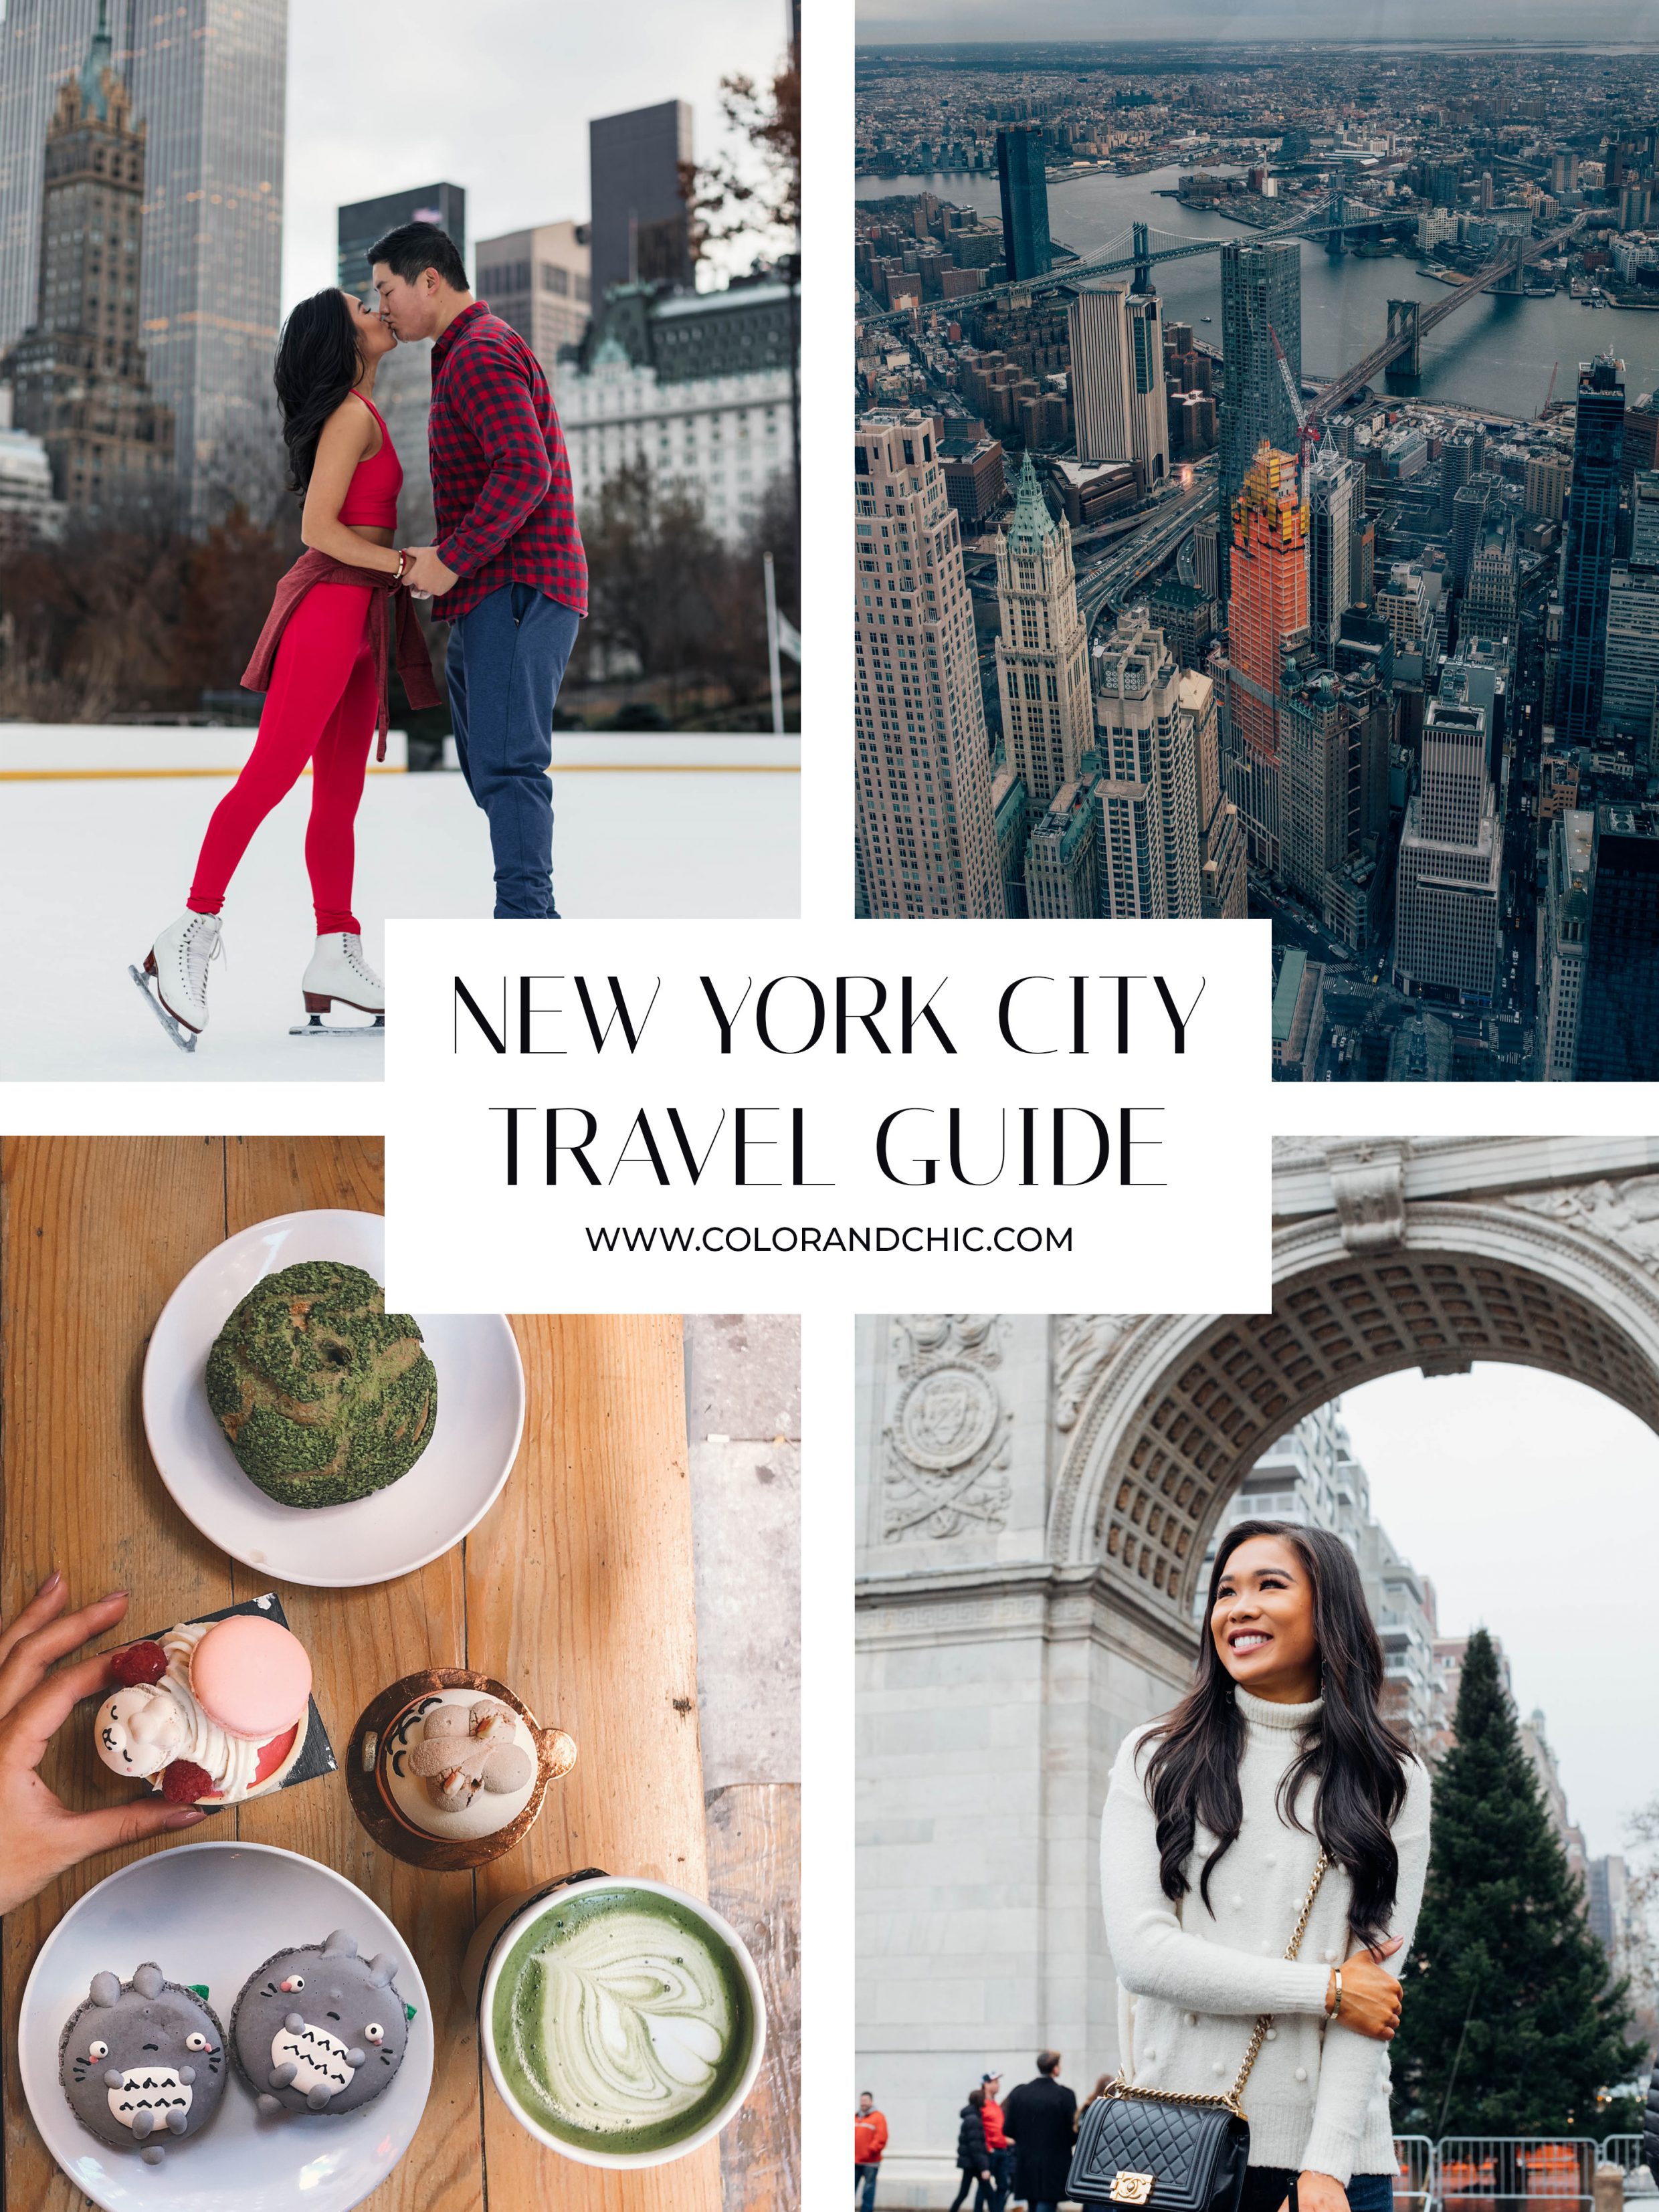 New York City Travel Guide from Blogger Hoang-Kim Cung